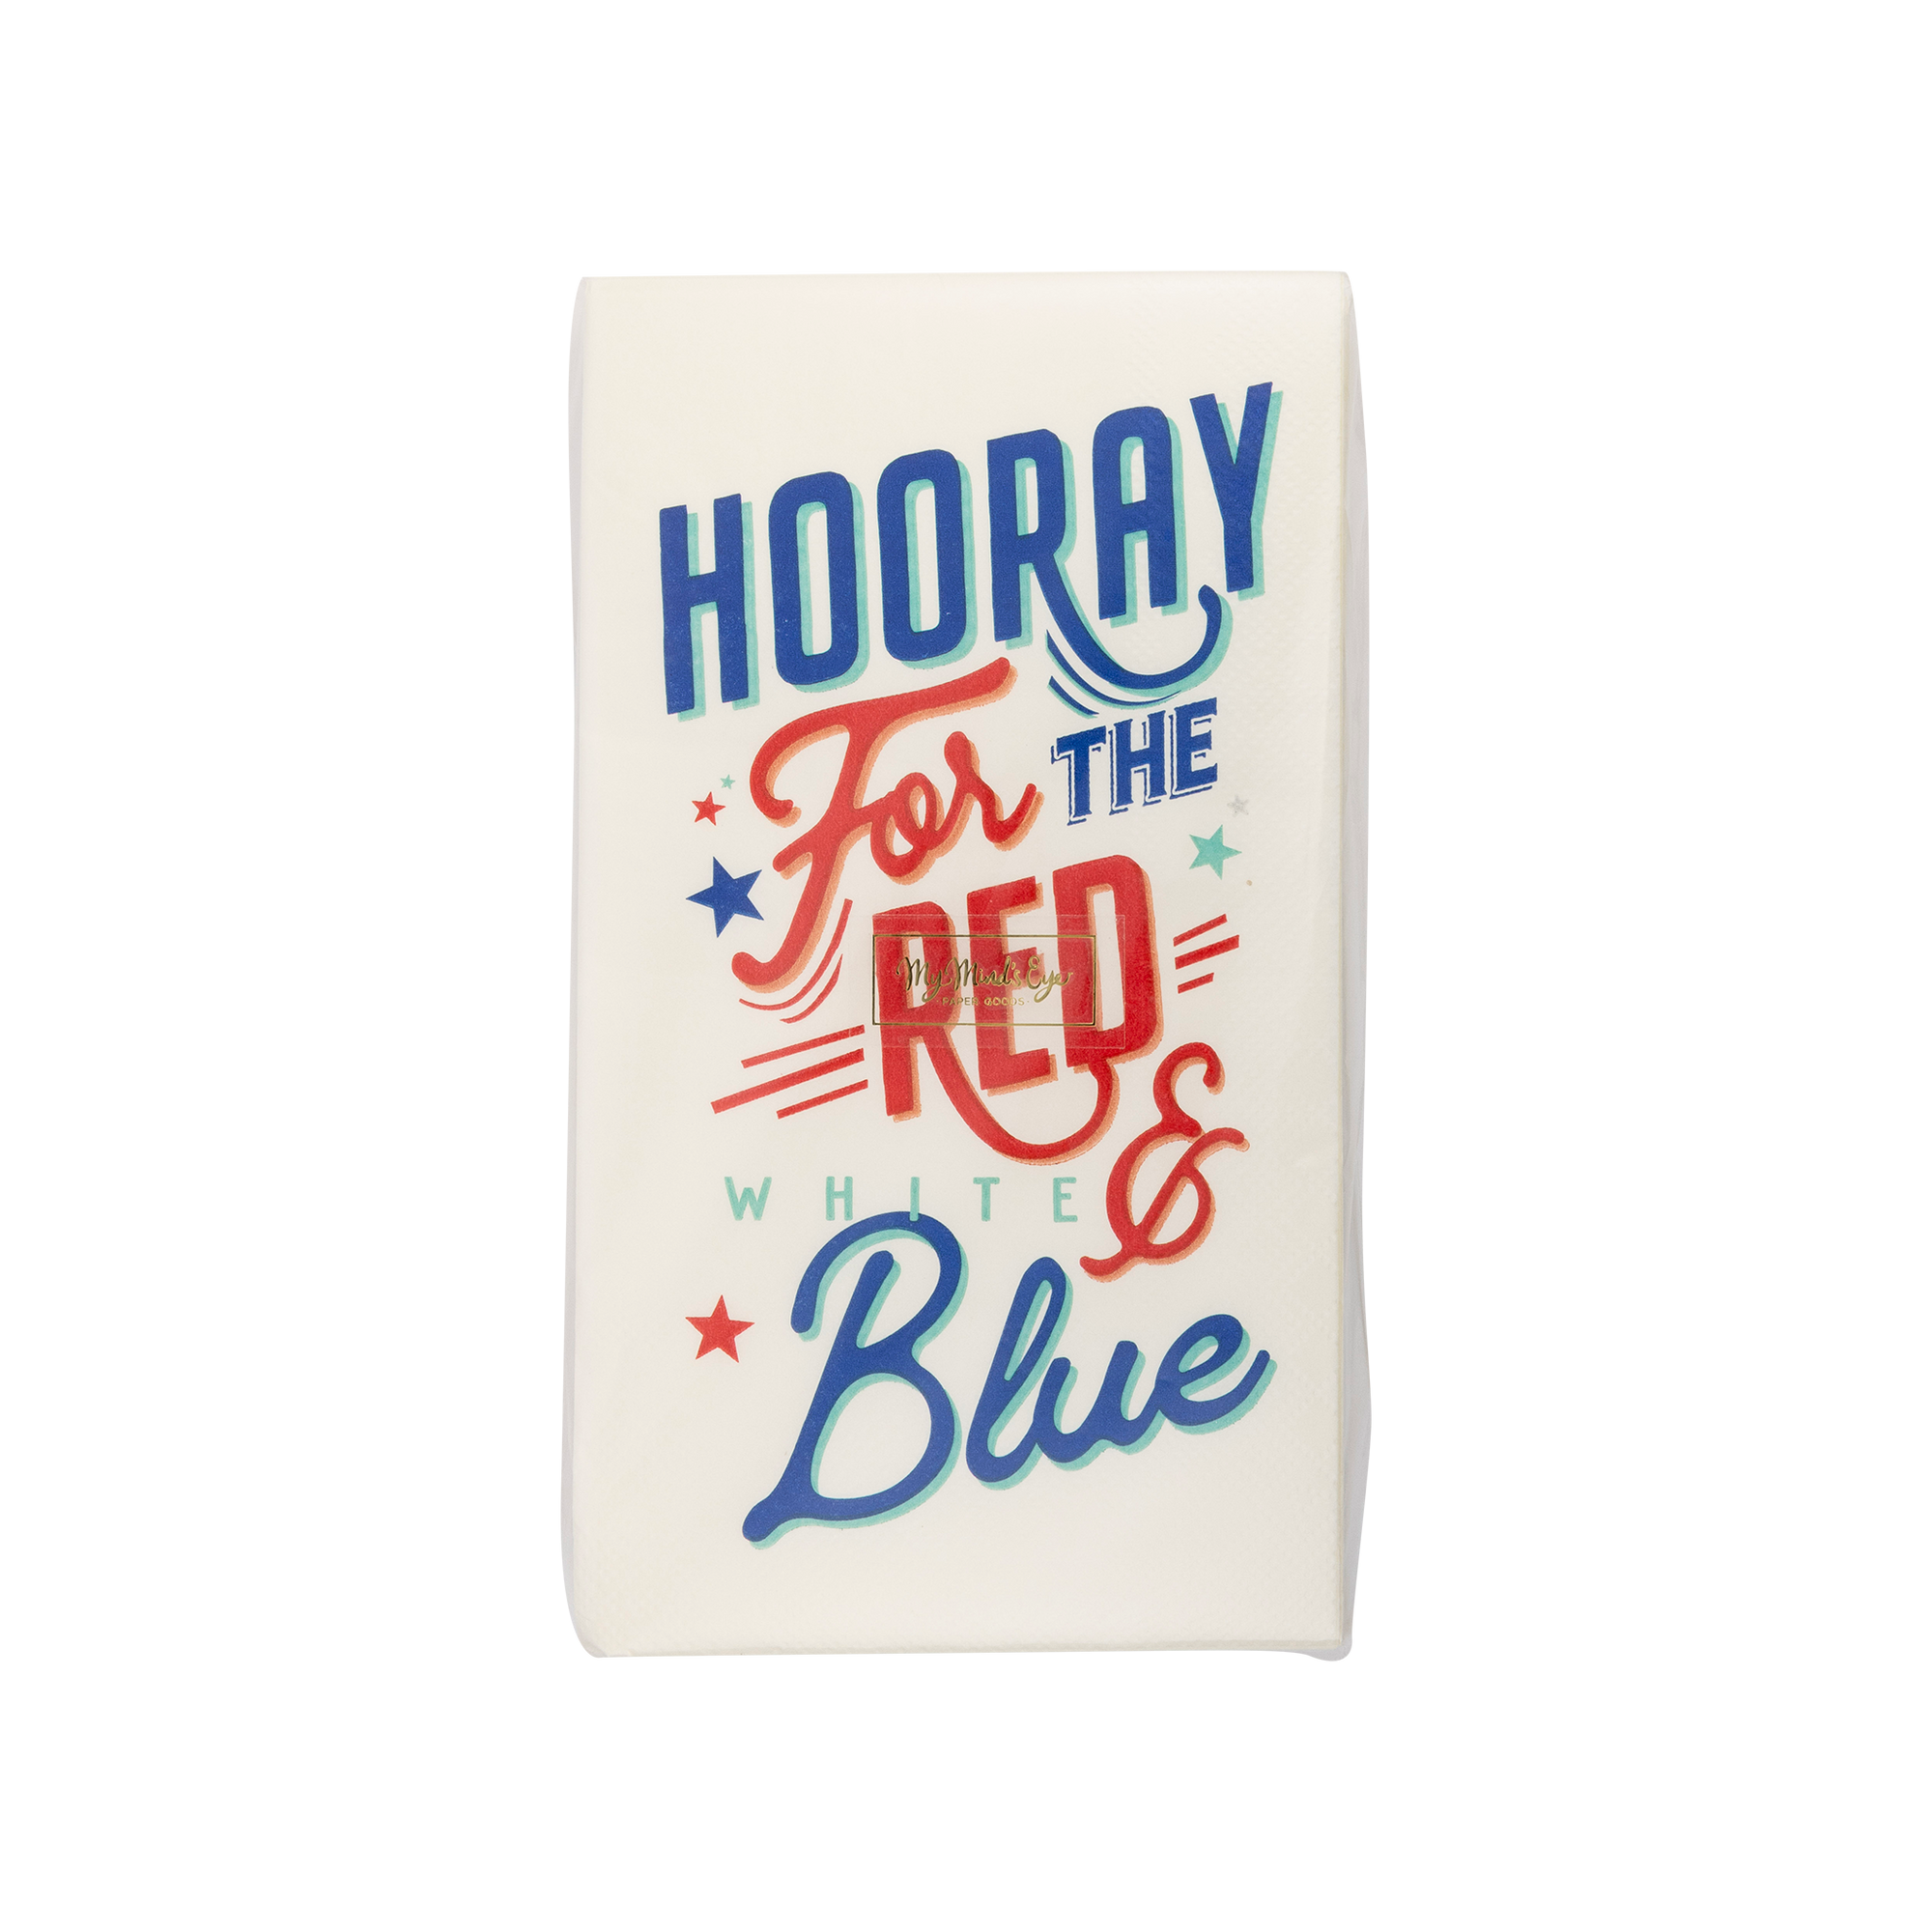 Hooray For The Red White Blue Napkins